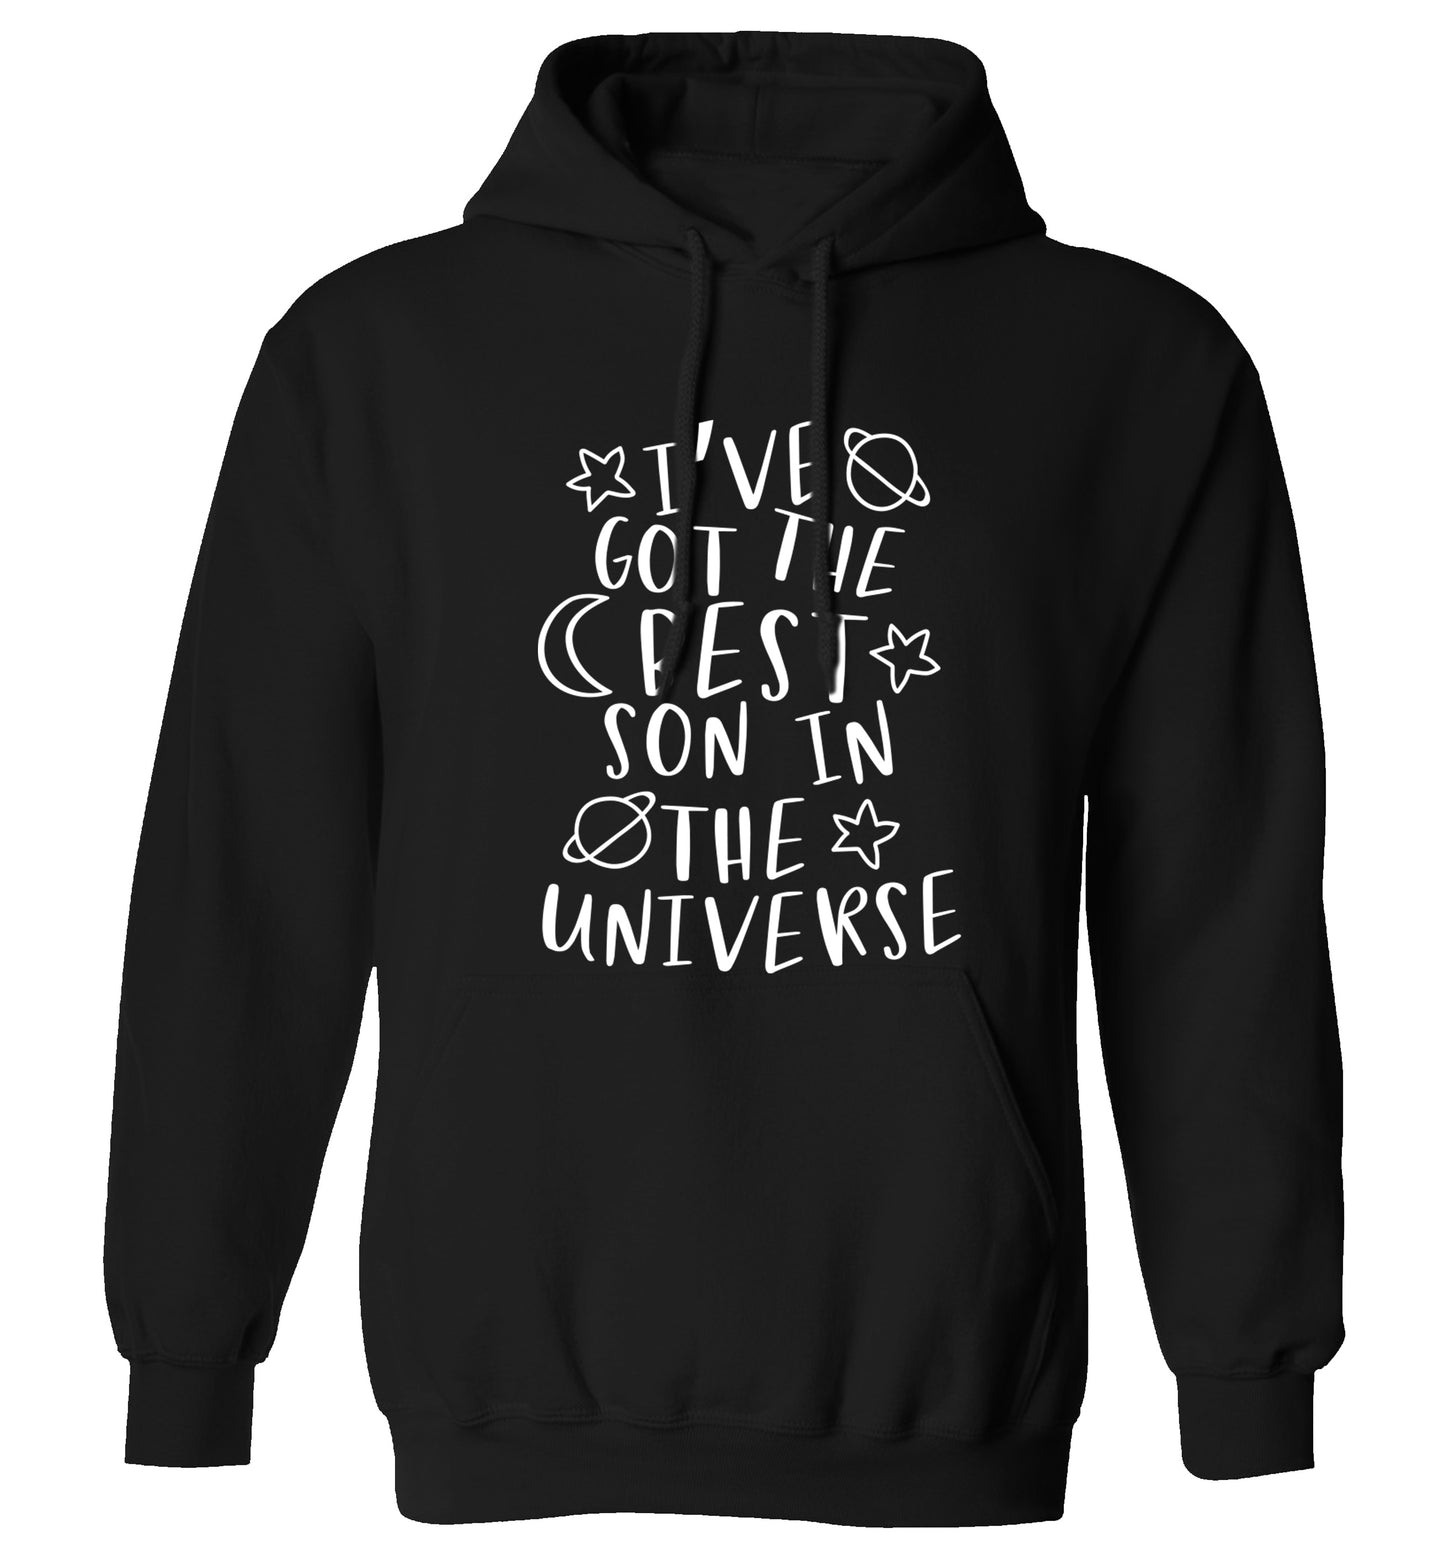 I've got the best son in the universe adults unisex black hoodie 2XL